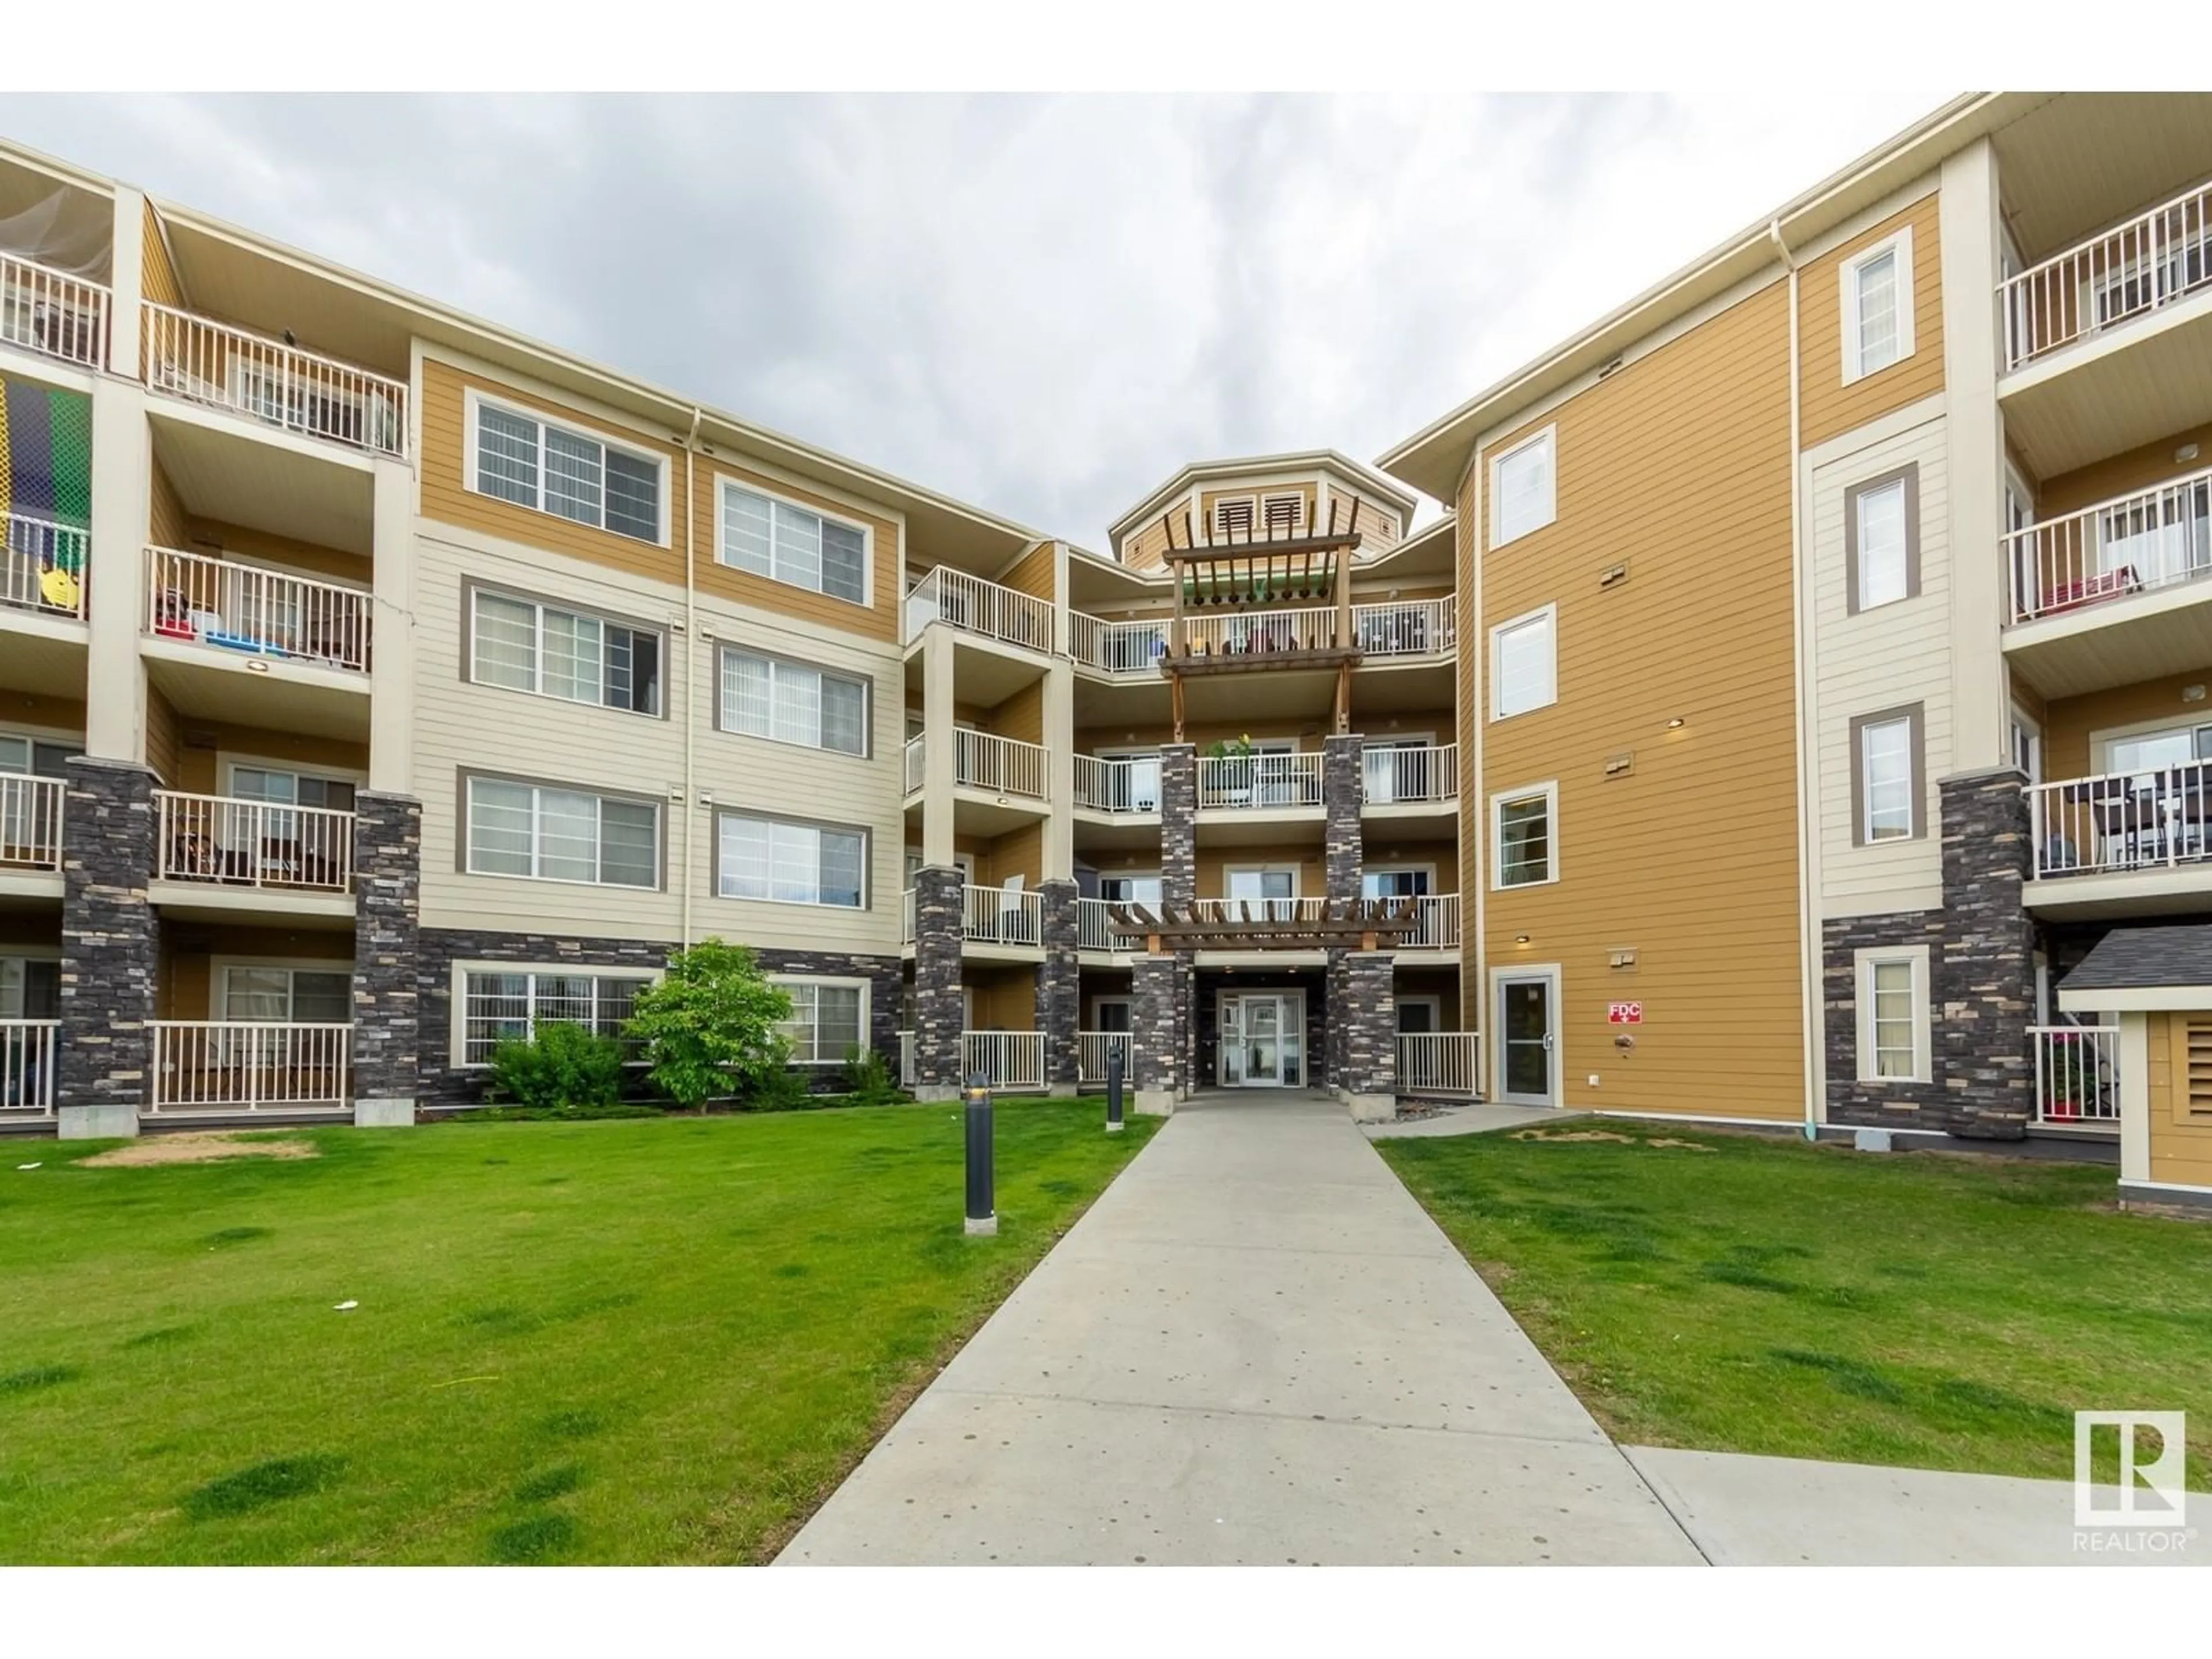 A pic from exterior of the house or condo for #410 3670 139 AV NW, Edmonton Alberta T5Y3N5